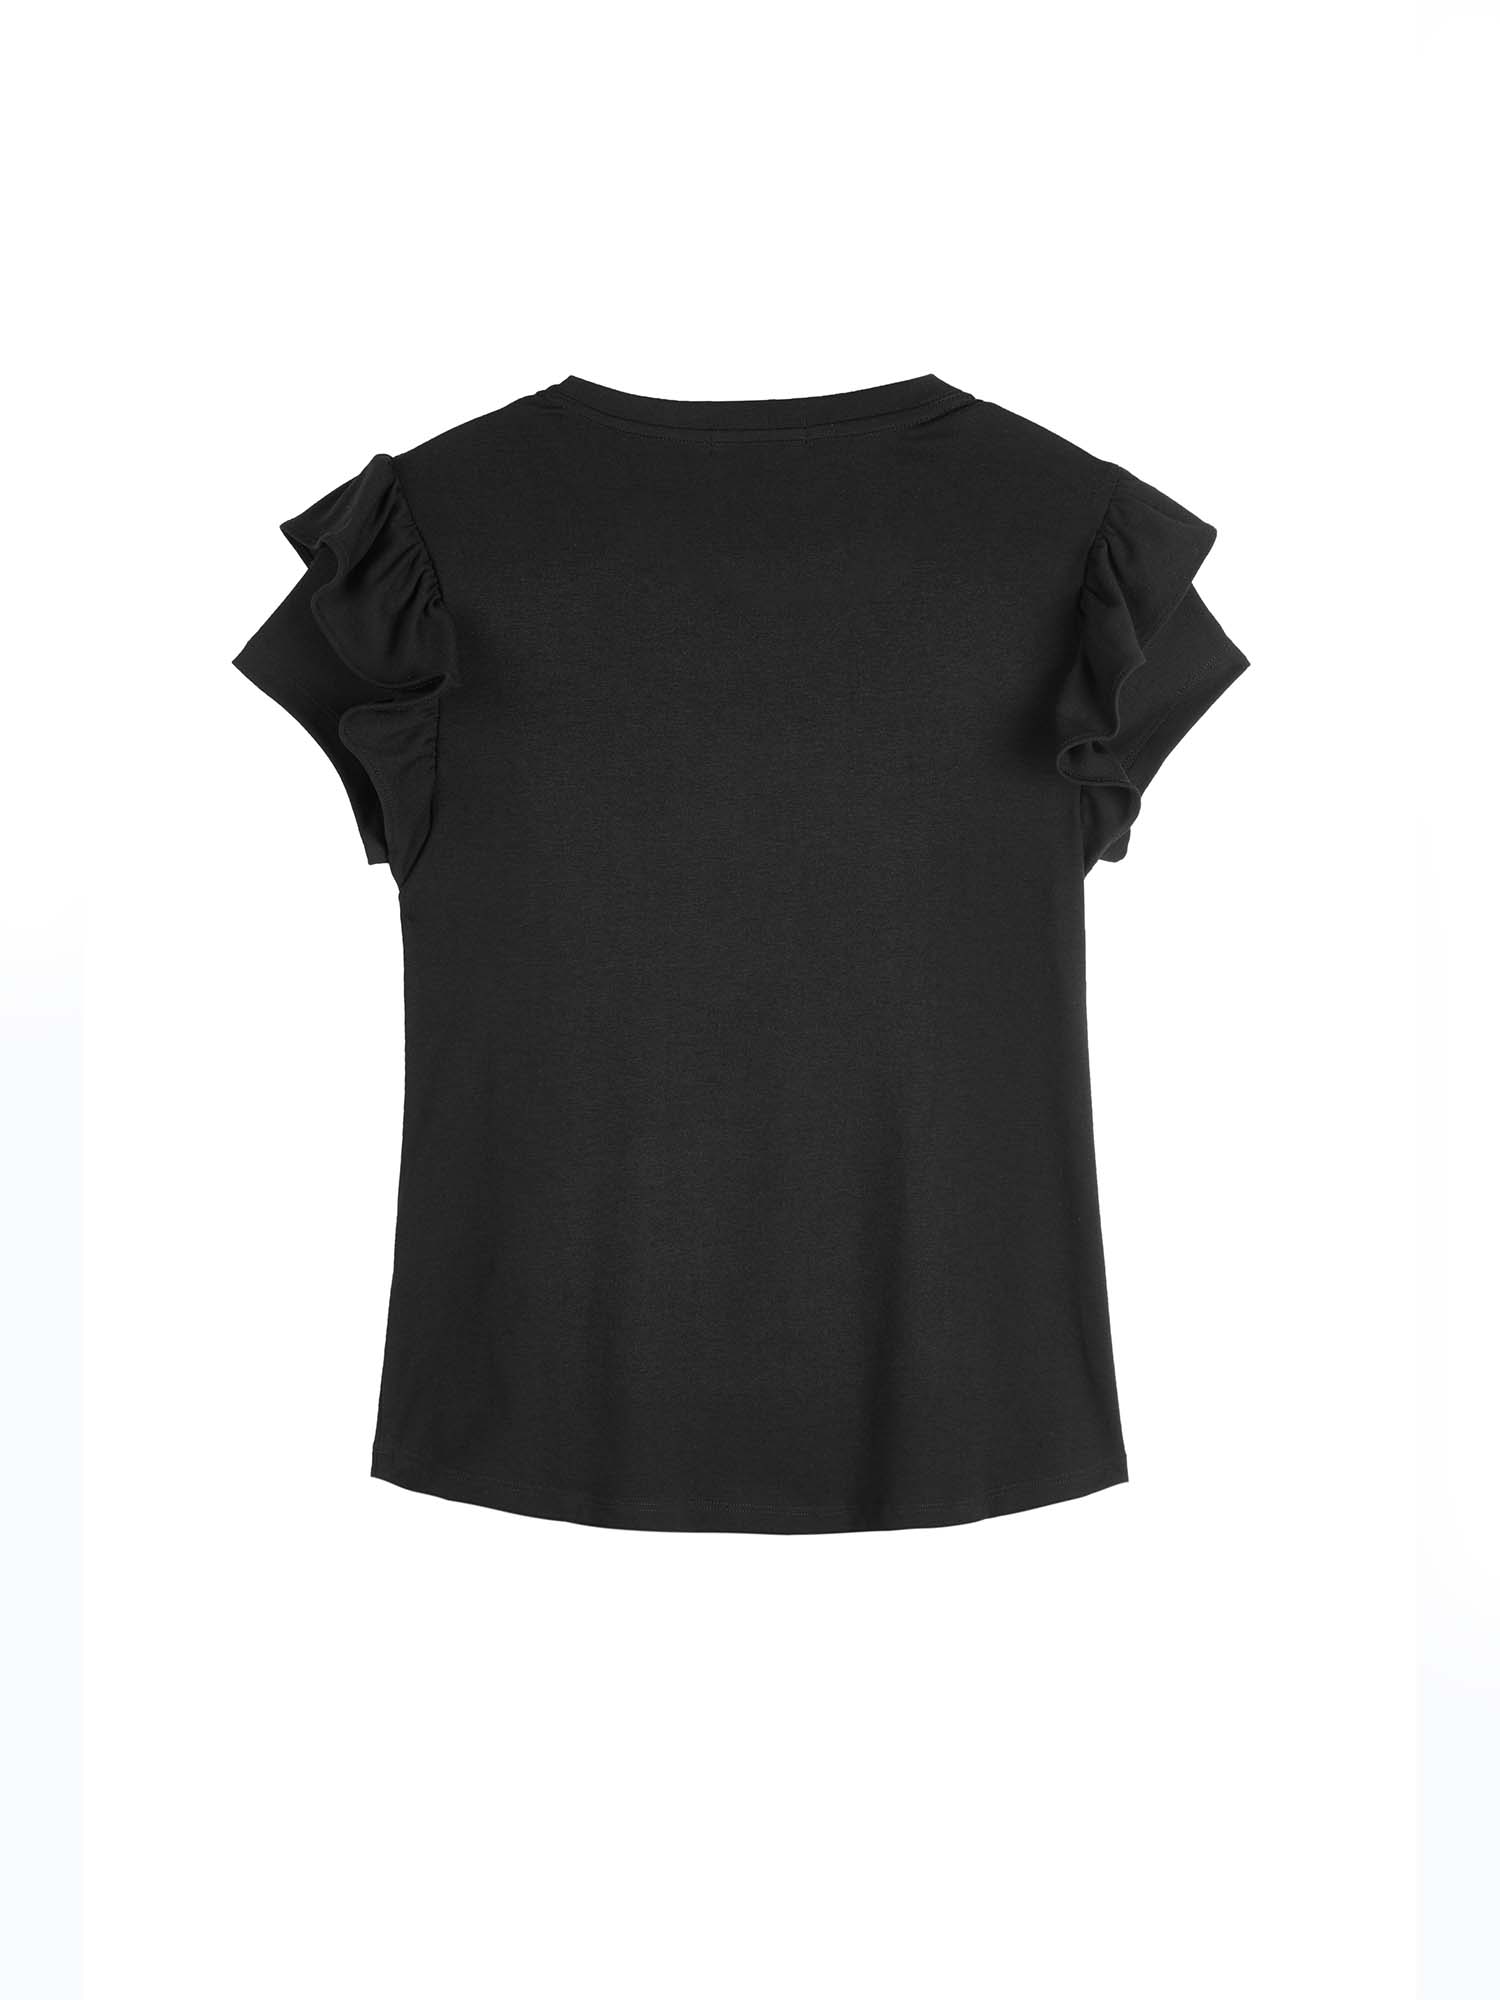 Fashionable round neck short-sleeve T-shirt bringing new style trends to women&#39;s outfits